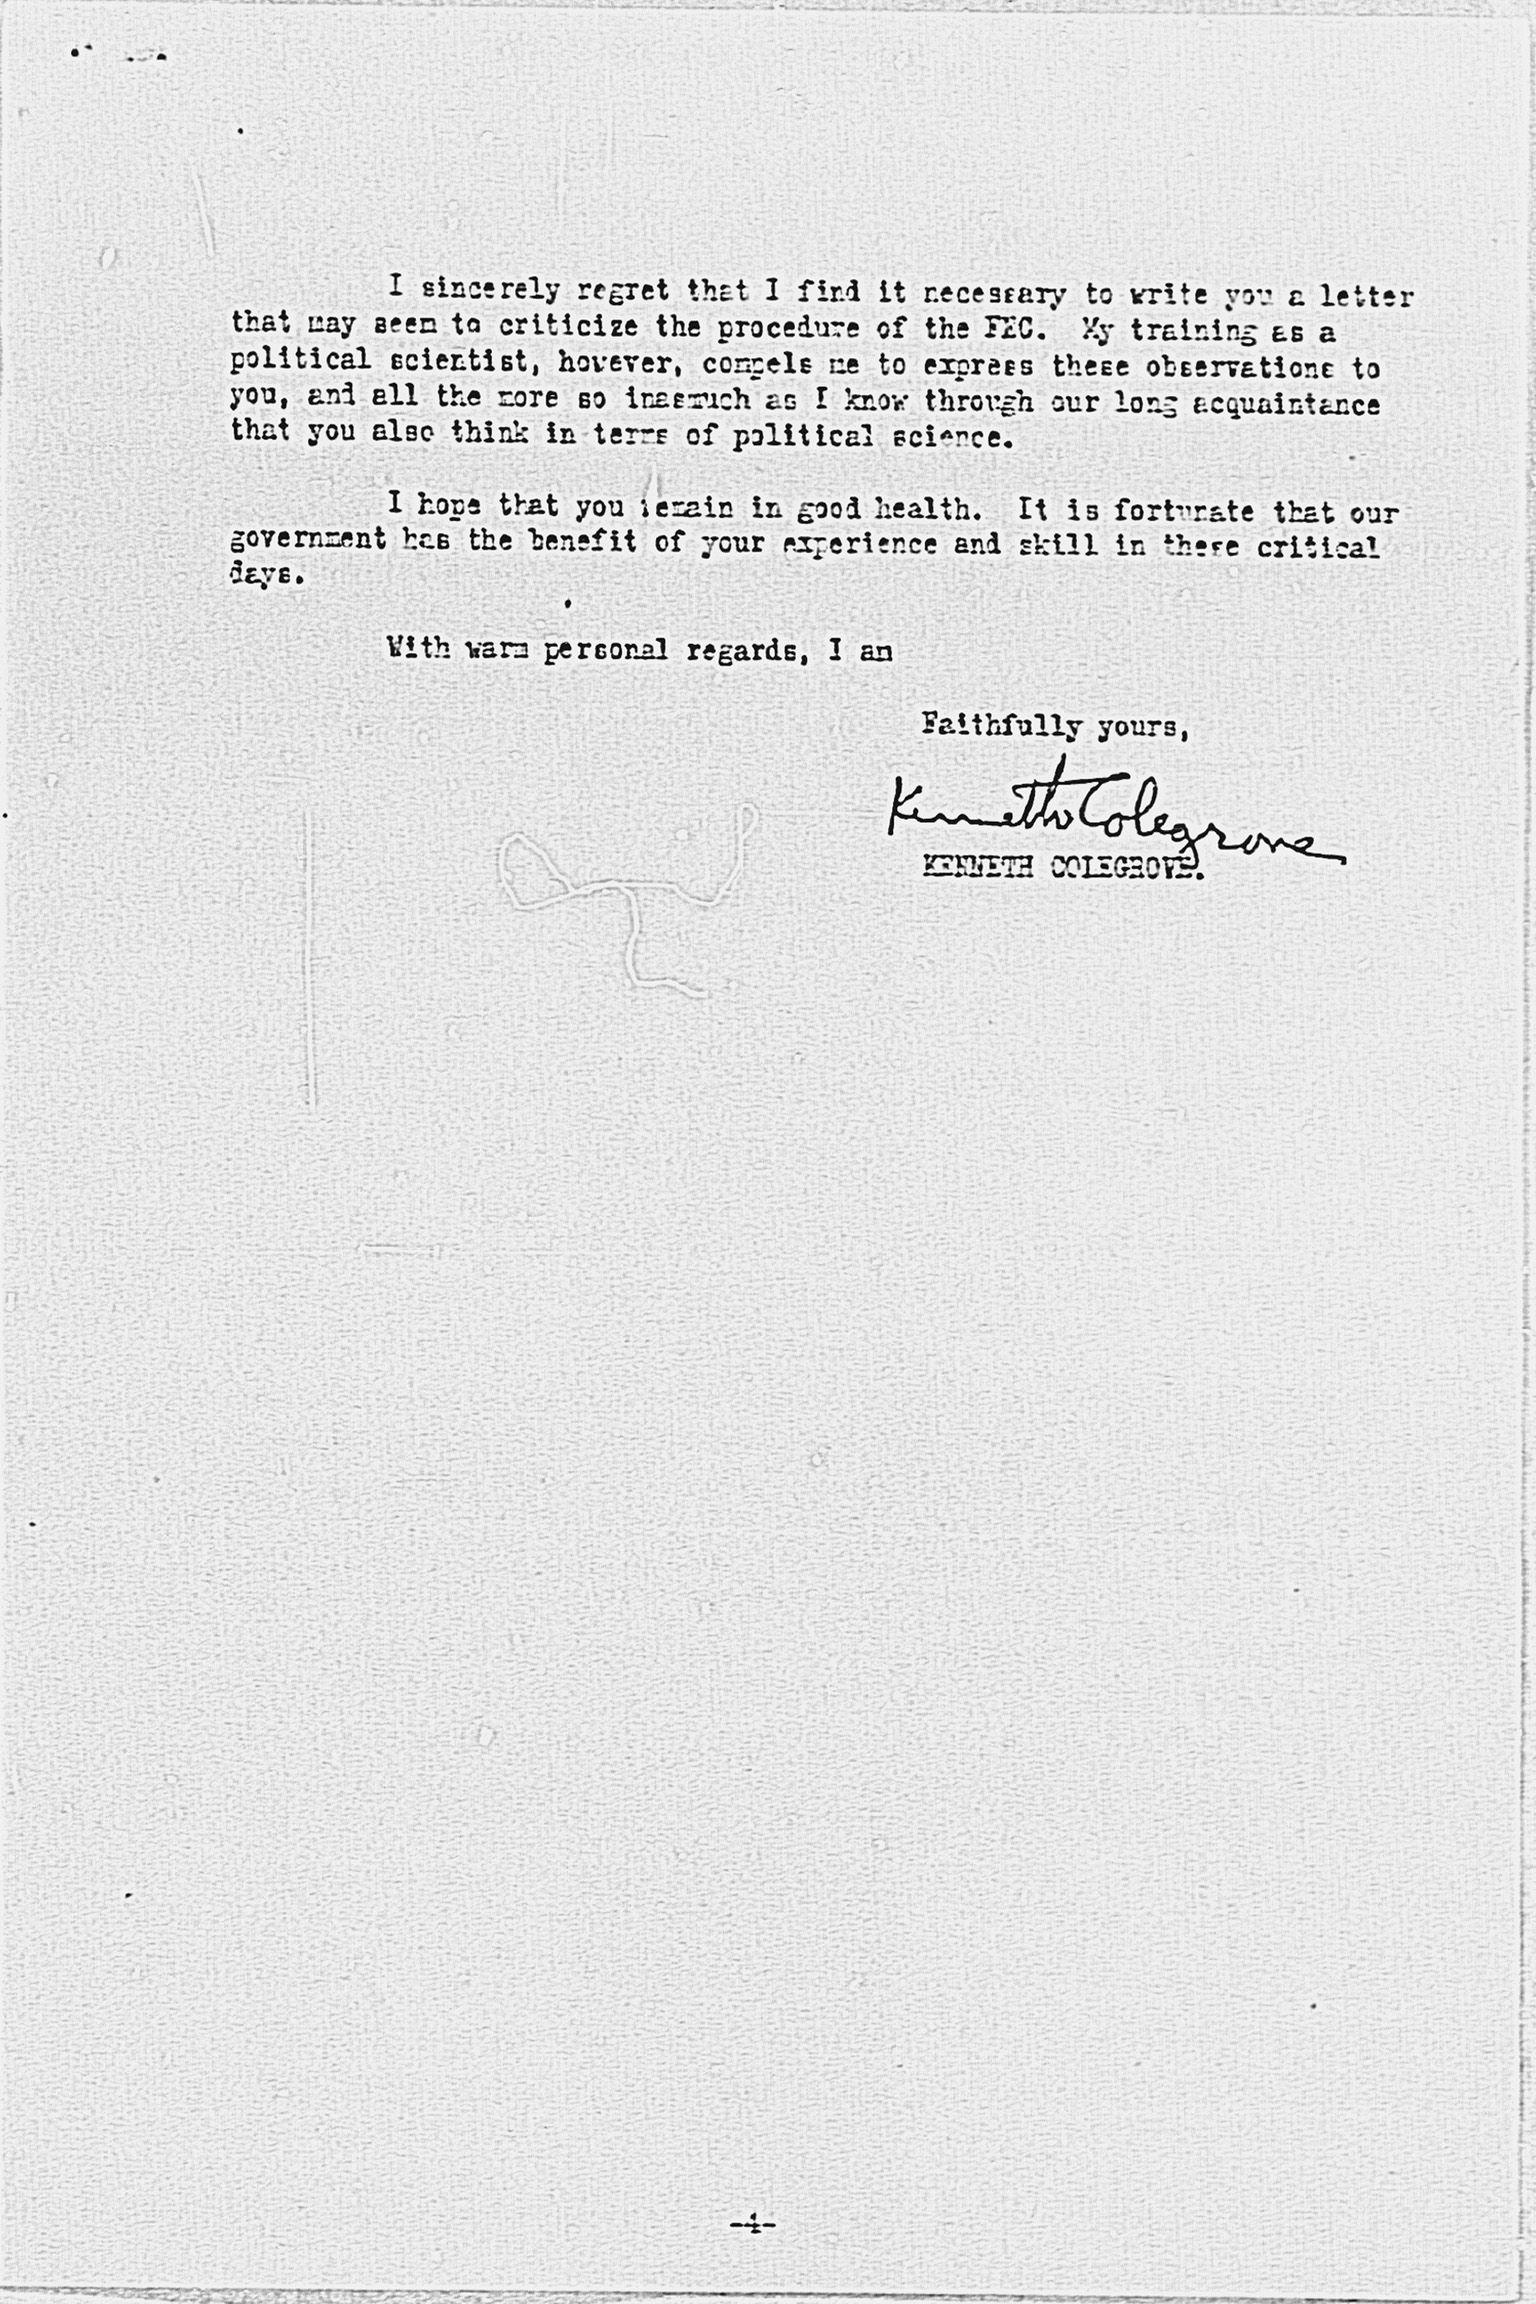 『Letter from Kenneth Colegrove to General Frank R. McCoy, dated 26 April 1946』(拡大画像)